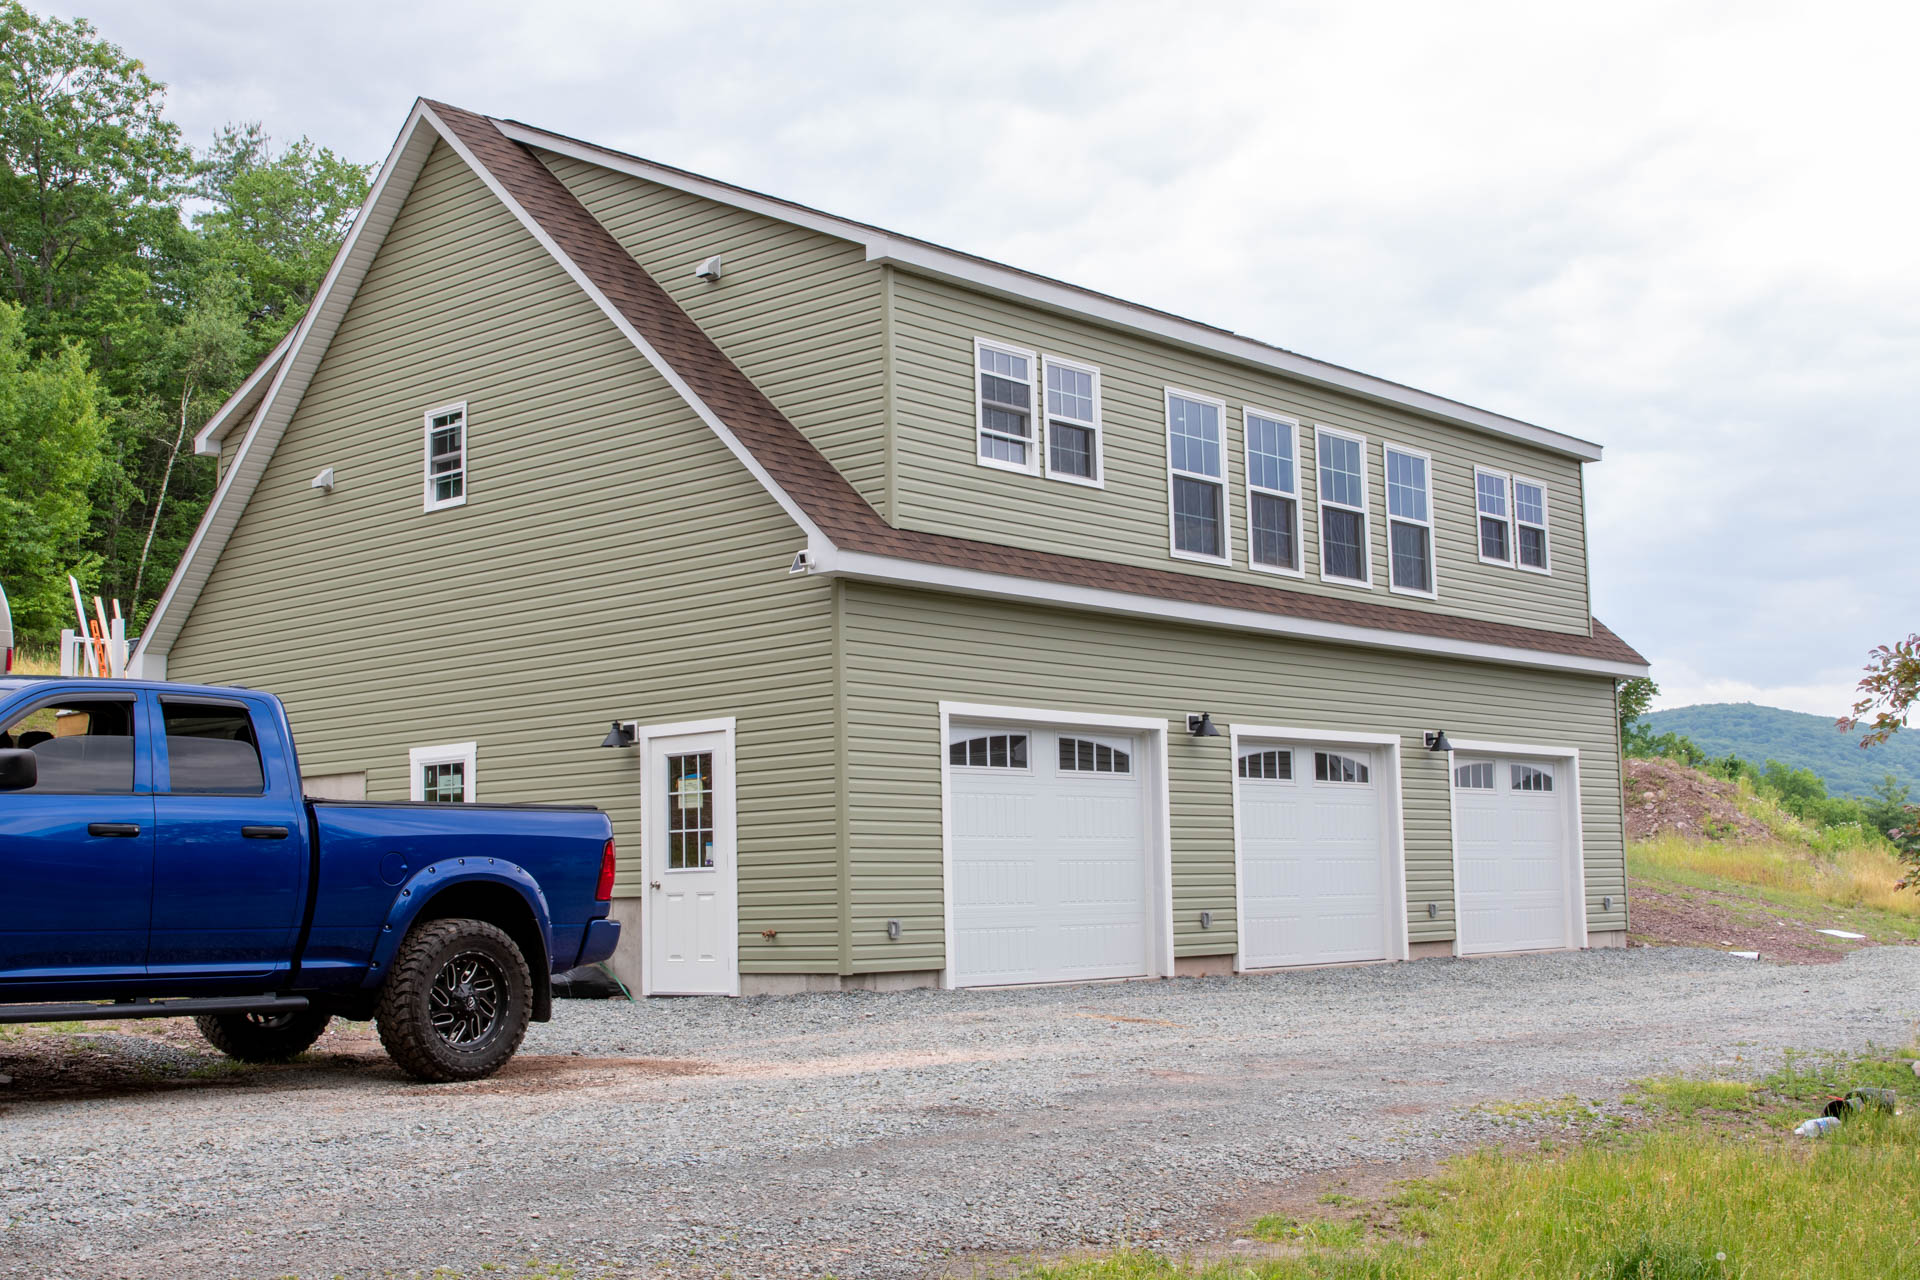 sage 32x42 legacy 2 story workshop 2 car garage in tunkhannocko pa with white trim and brown roof